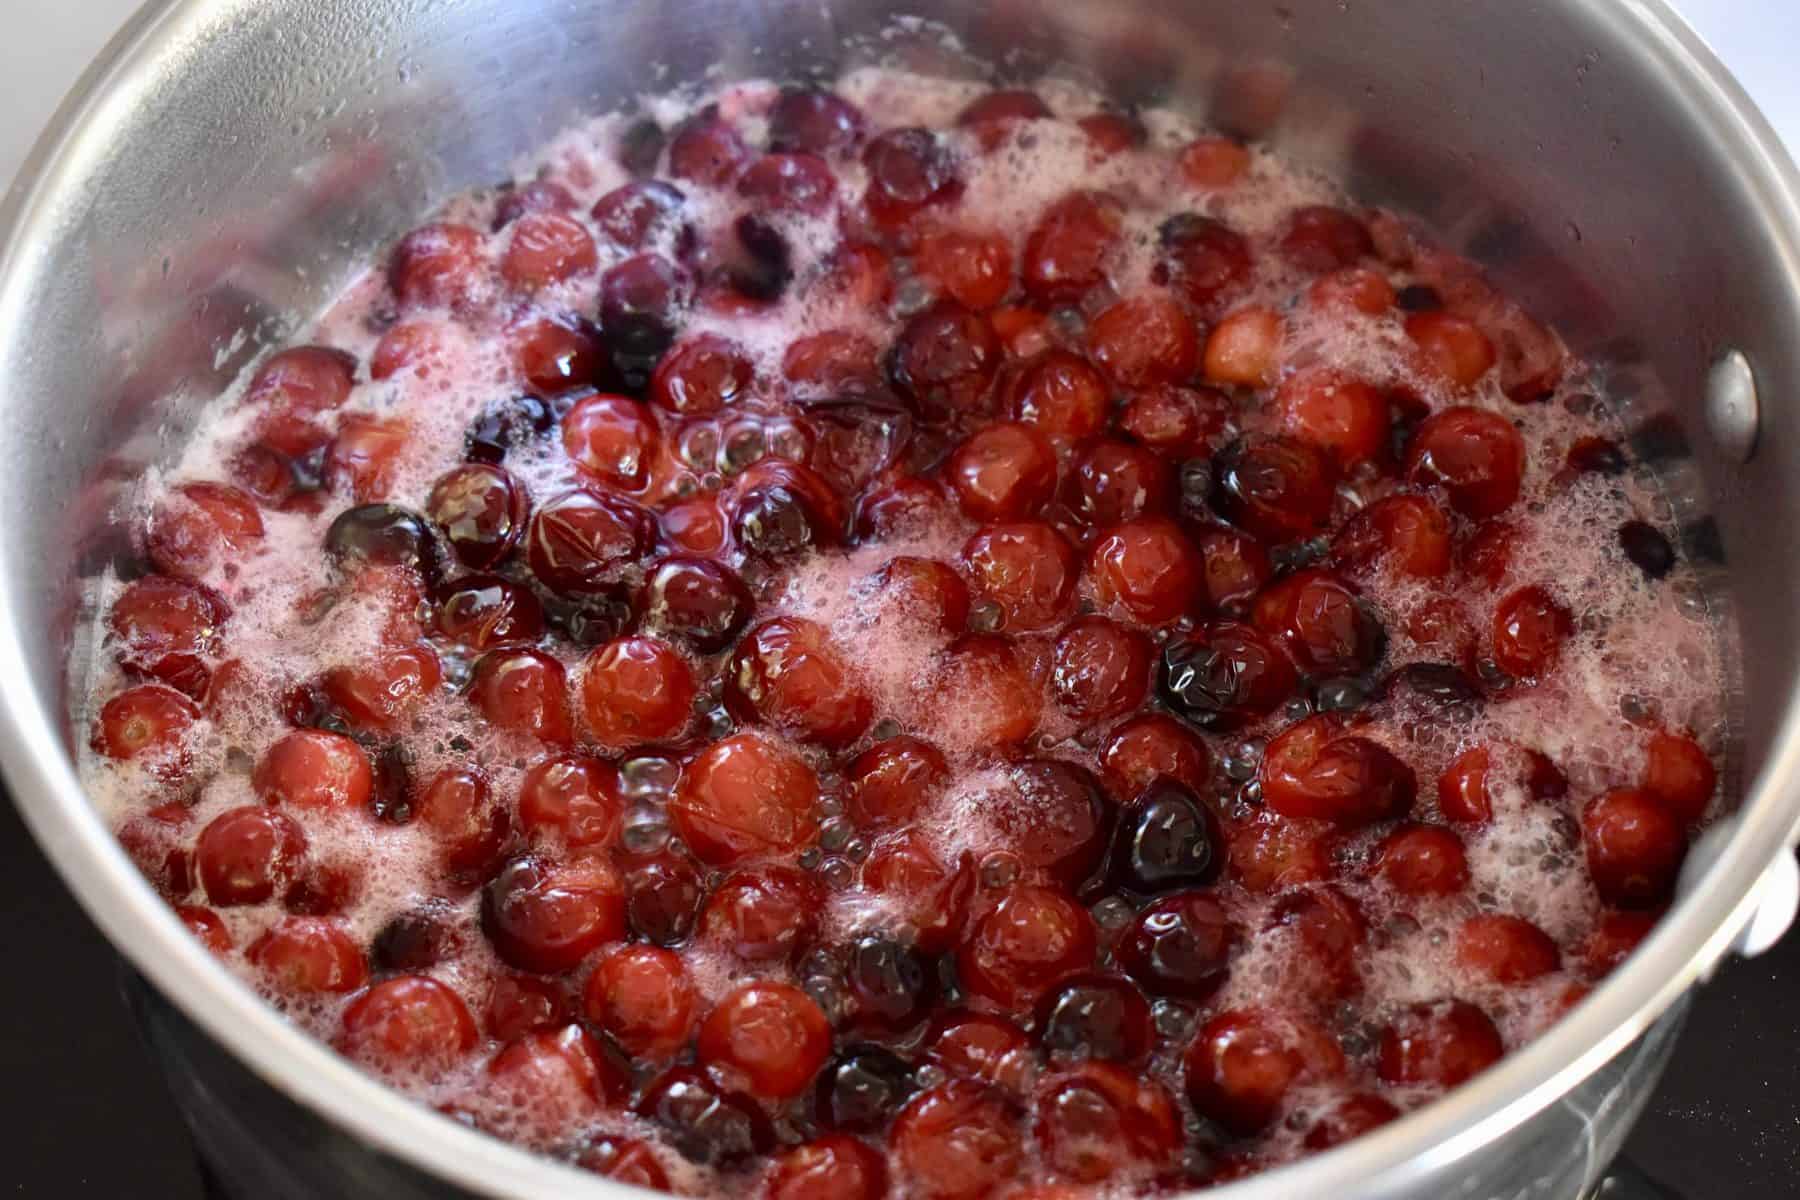 cranberries in the pot popped open after simmering. 